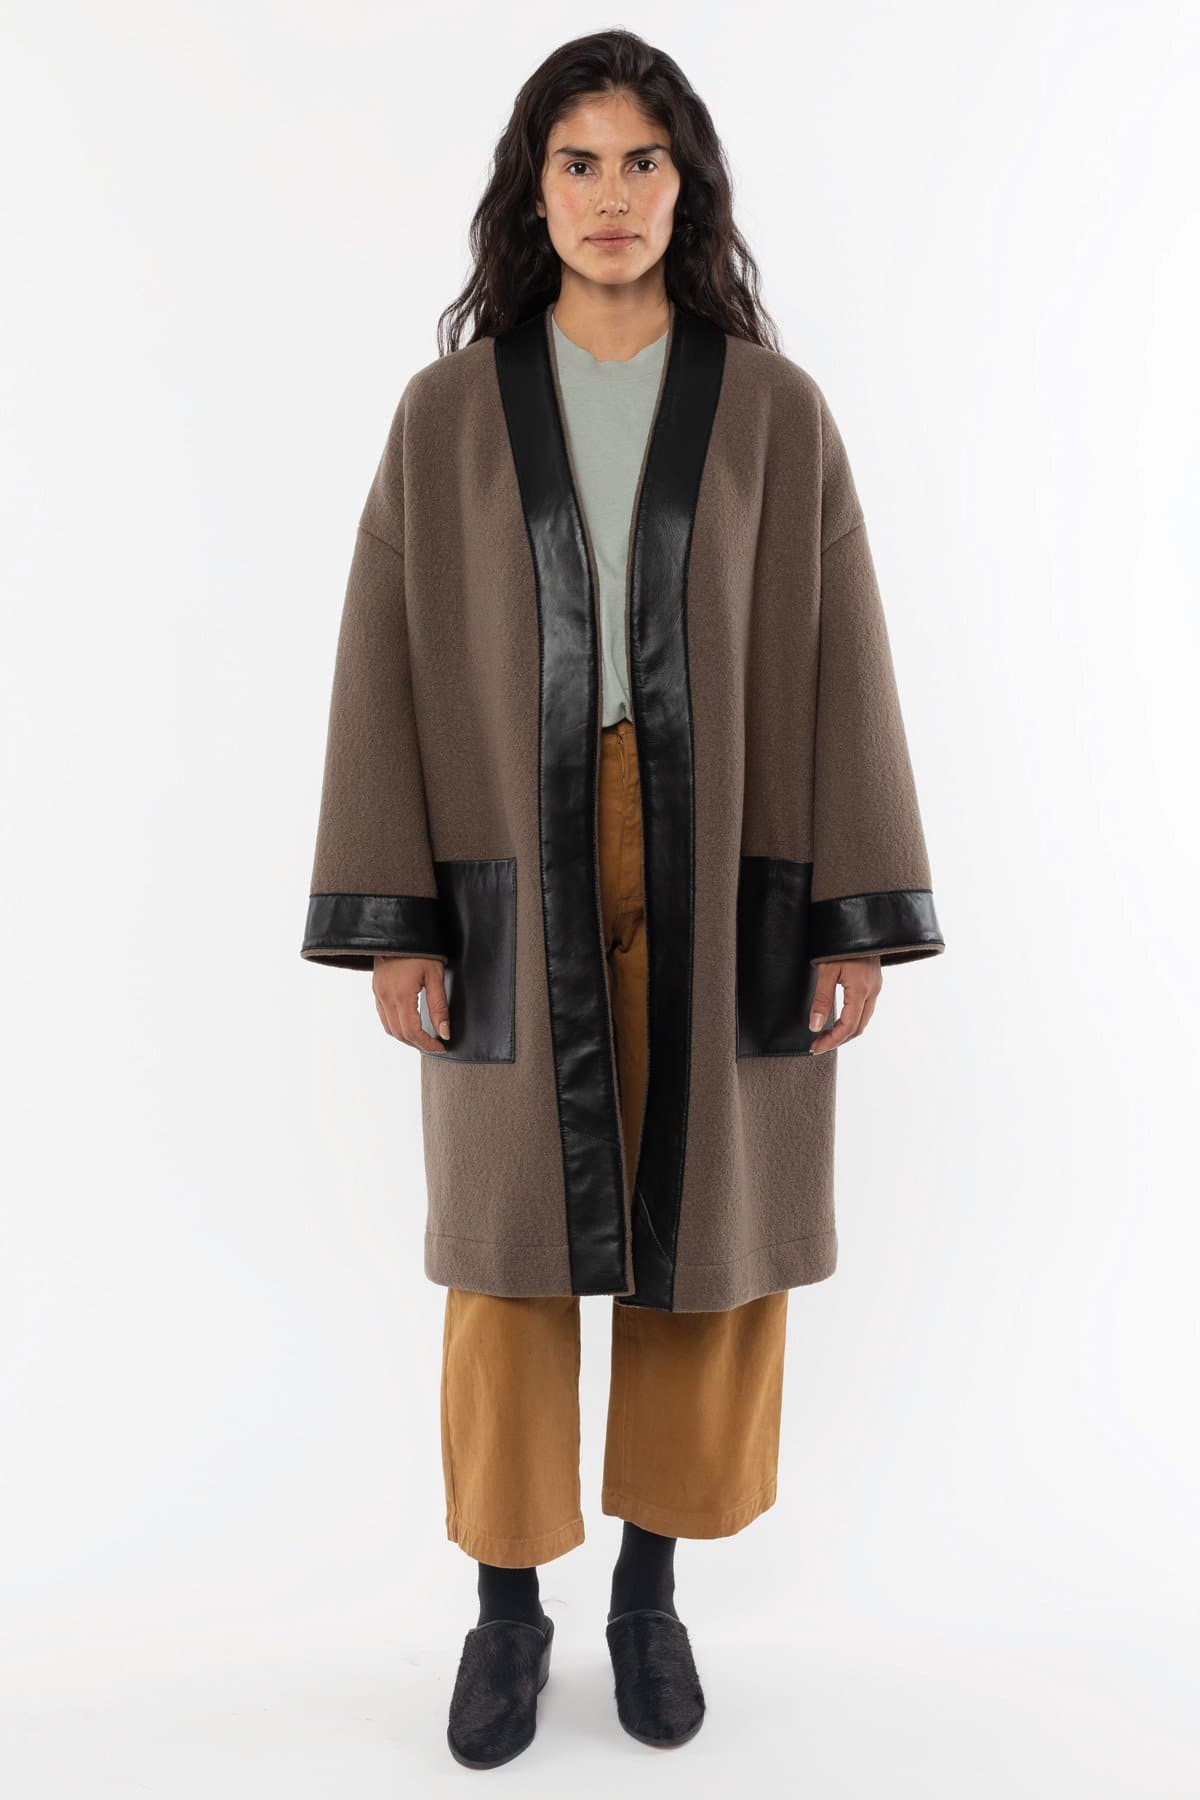 RWL100 - Wool Coat with Leather Trim – Los Angeles Apparel